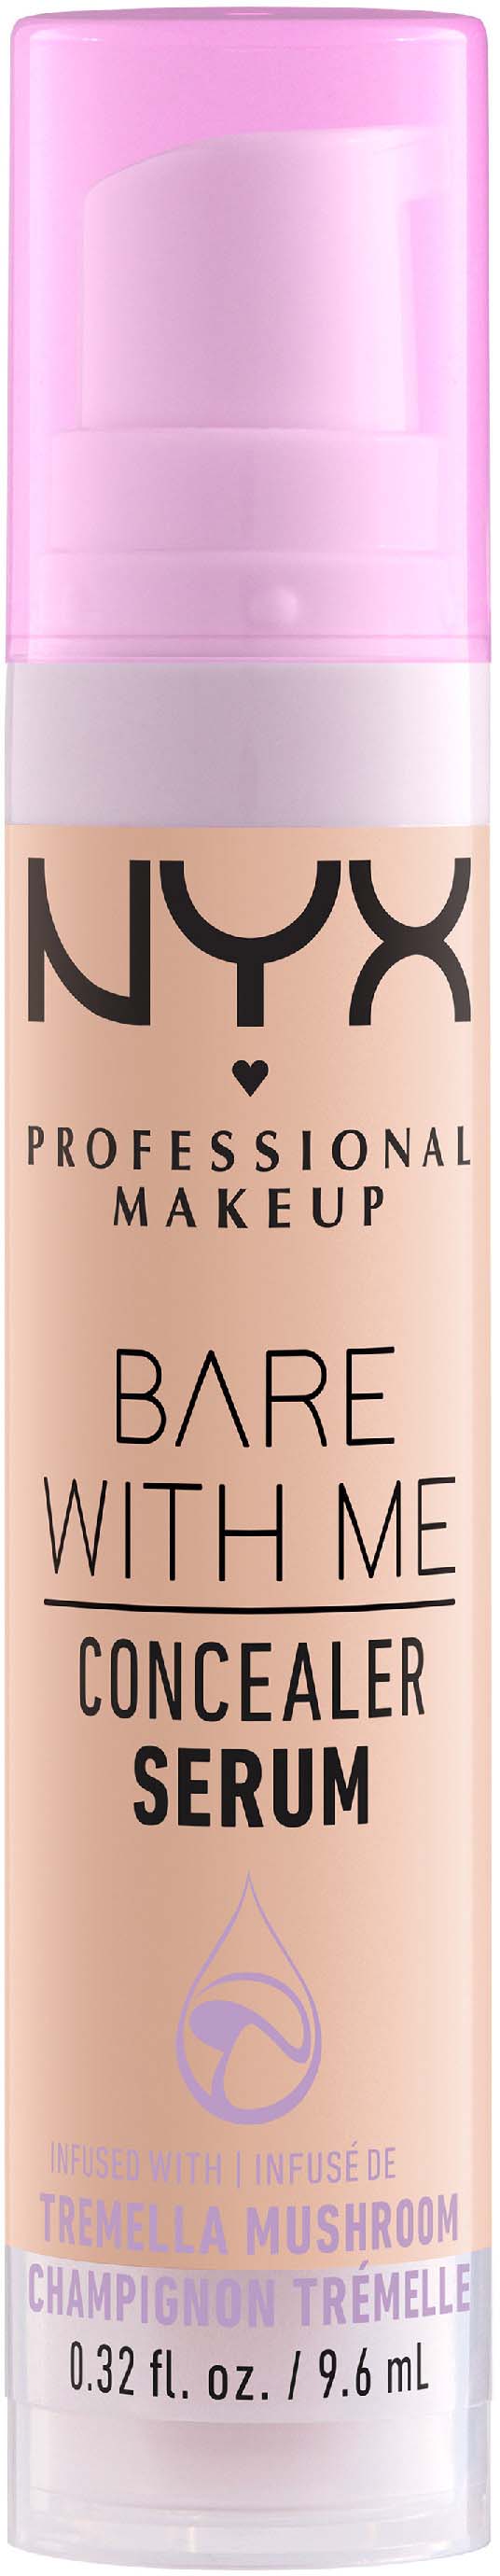 Bare NYX With Light Serum MAKEUP Me Concealer PROFESSIONAL